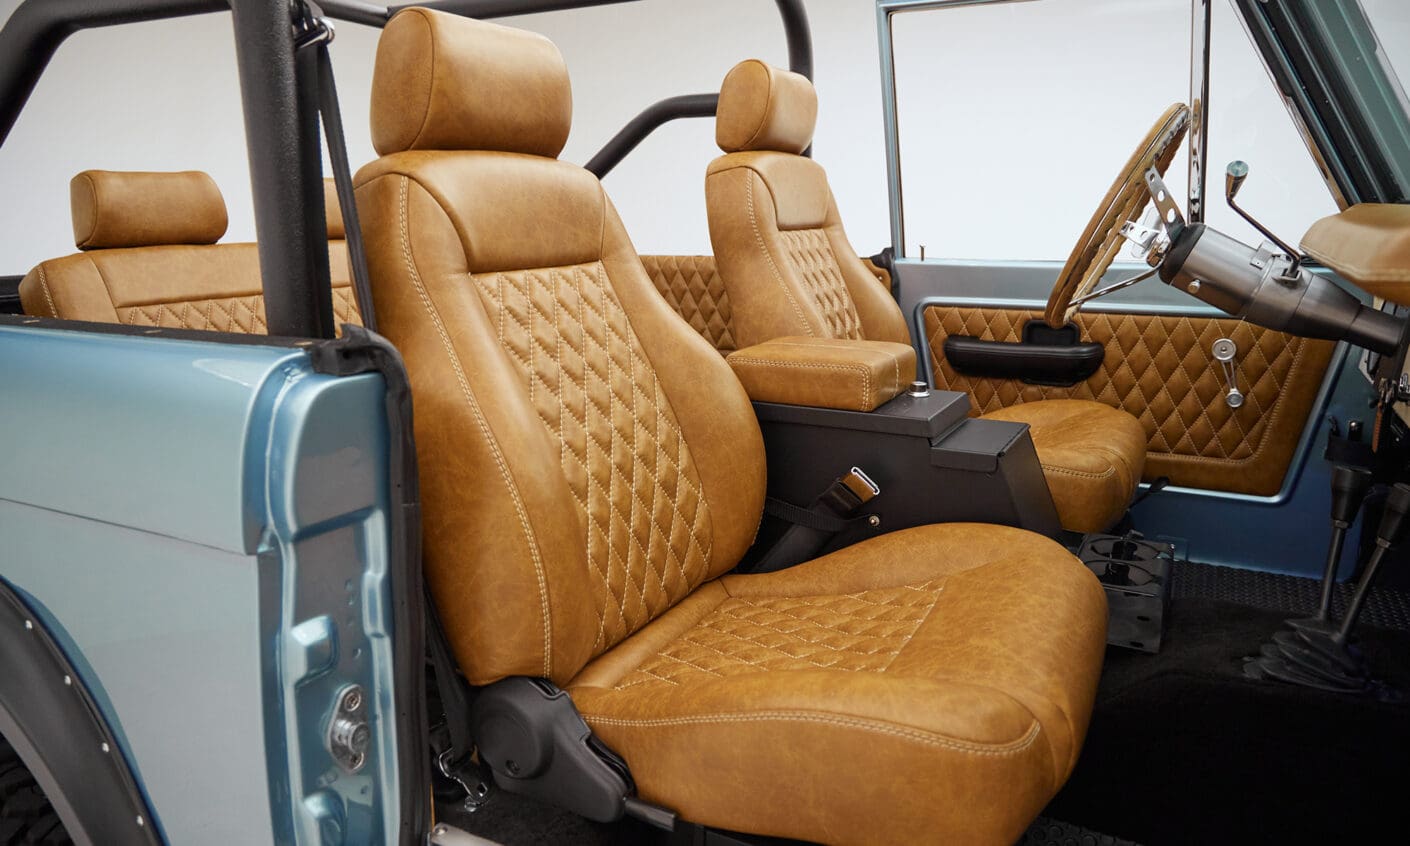 1976 Ford Bronco in Brittany Blue with whiskey diamond stitch passenger seat